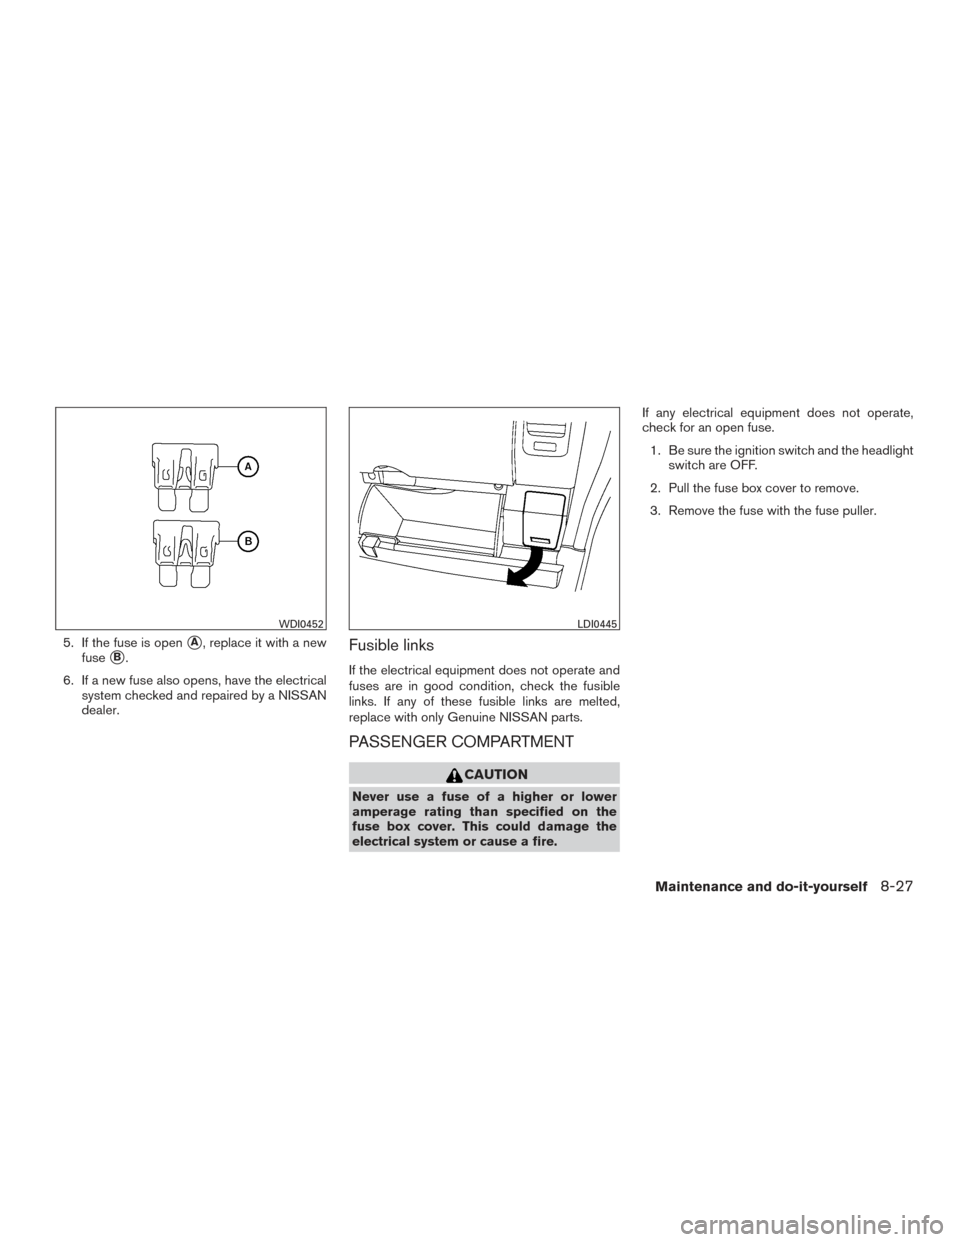 NISSAN FRONTIER 2015 D23 / 3.G Service Manual 5. If the fuse is openA, replace it with a new
fuse
B.
6. If a new fuse also opens, have the electrical system checked and repaired by a NISSAN
dealer.Fusible links
If the electrical equipment does 